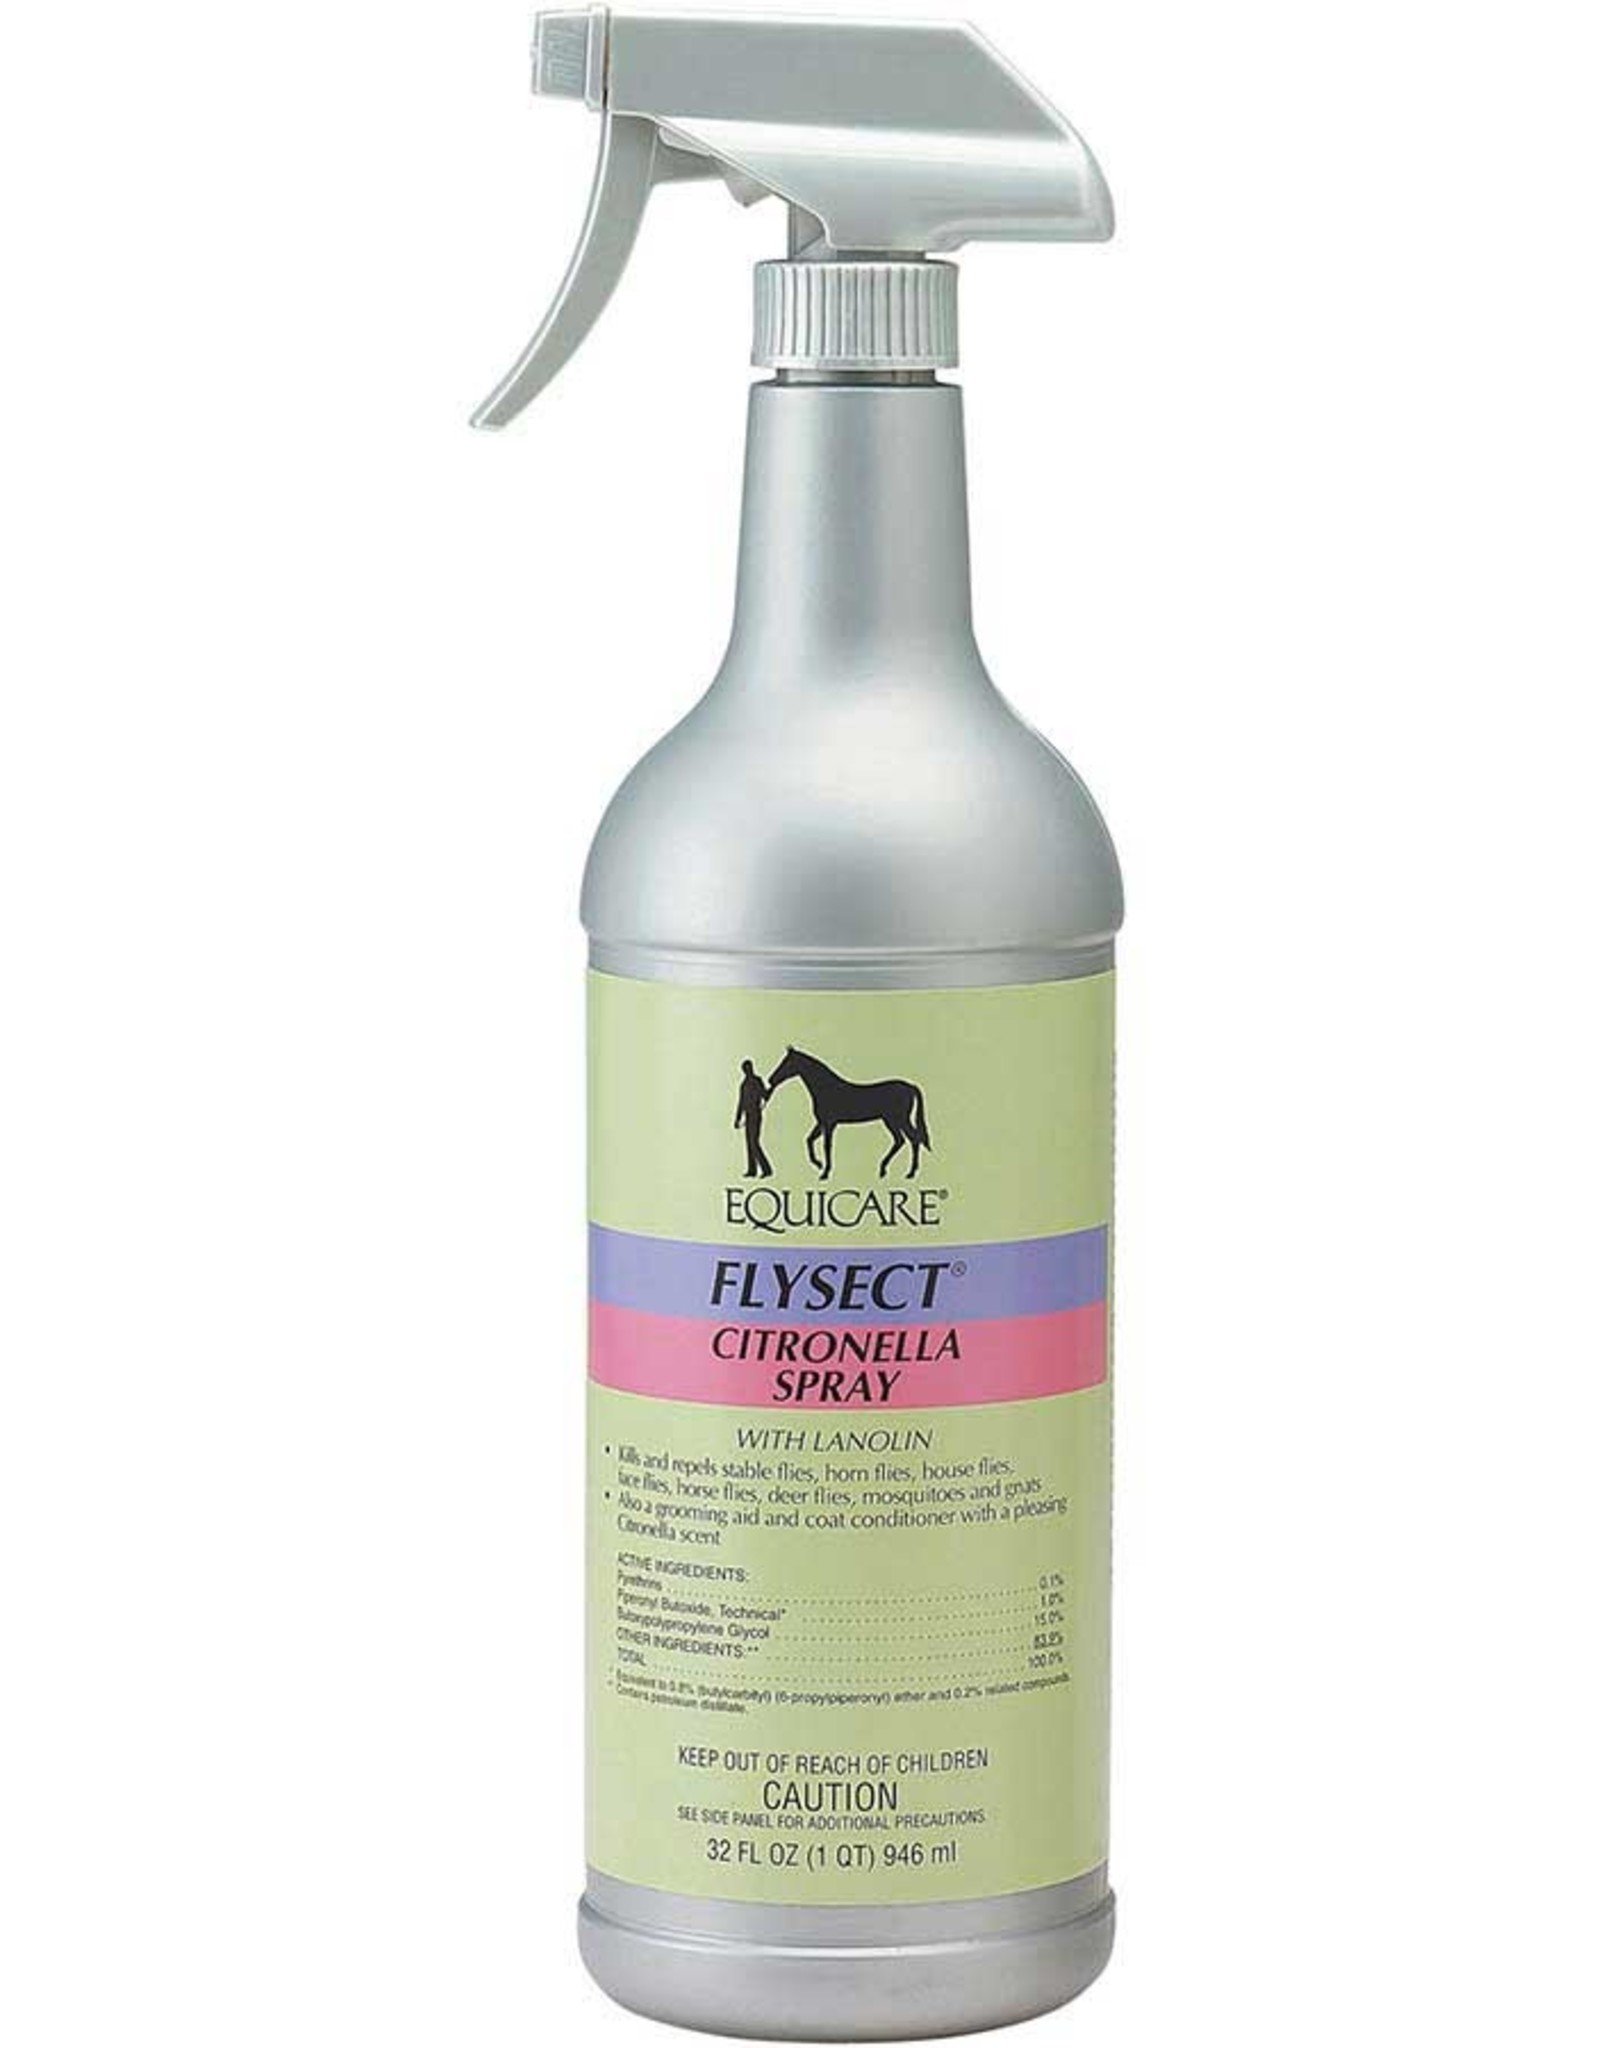 Equicare Flysect Citronella Fly Repellent - 32oz